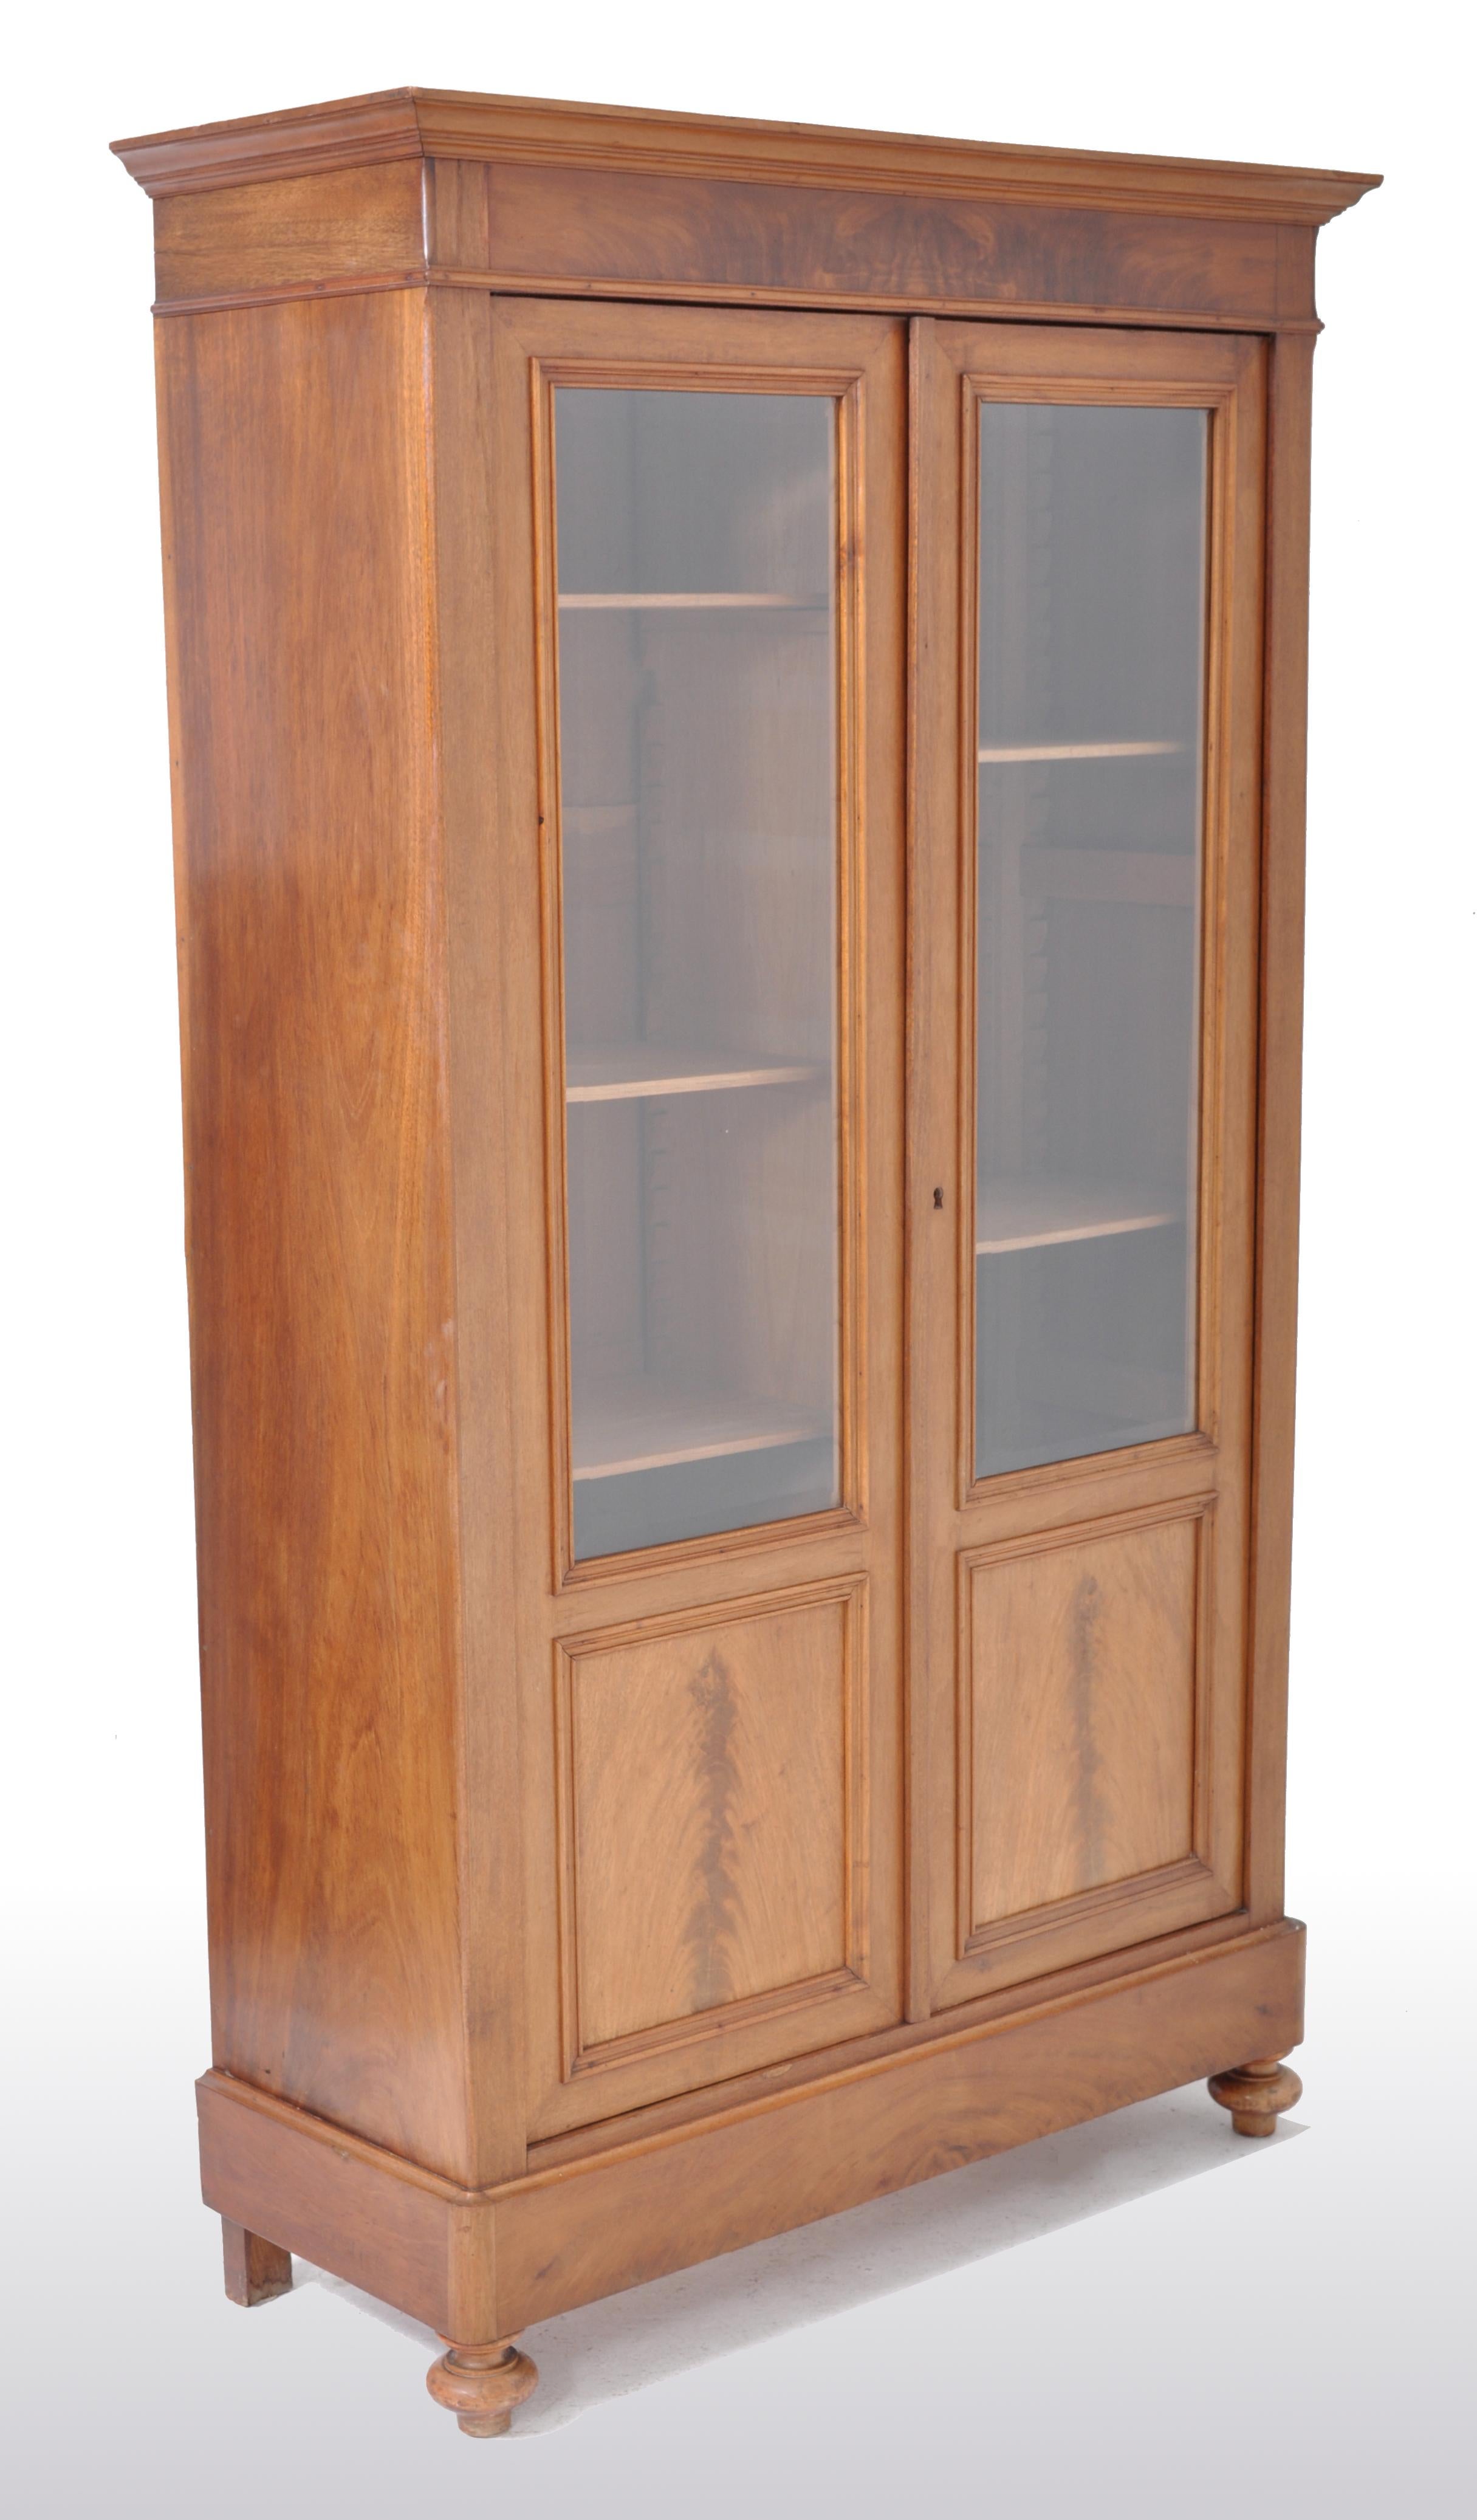 Antique French Louis Philippe walnut bookcase / cabinet / vitrine, circa 1850. The bookcase made from finely figured walnut throughout and having a stepped cornice to the top. Below are two doors, each with the original beveled glass and enclosing